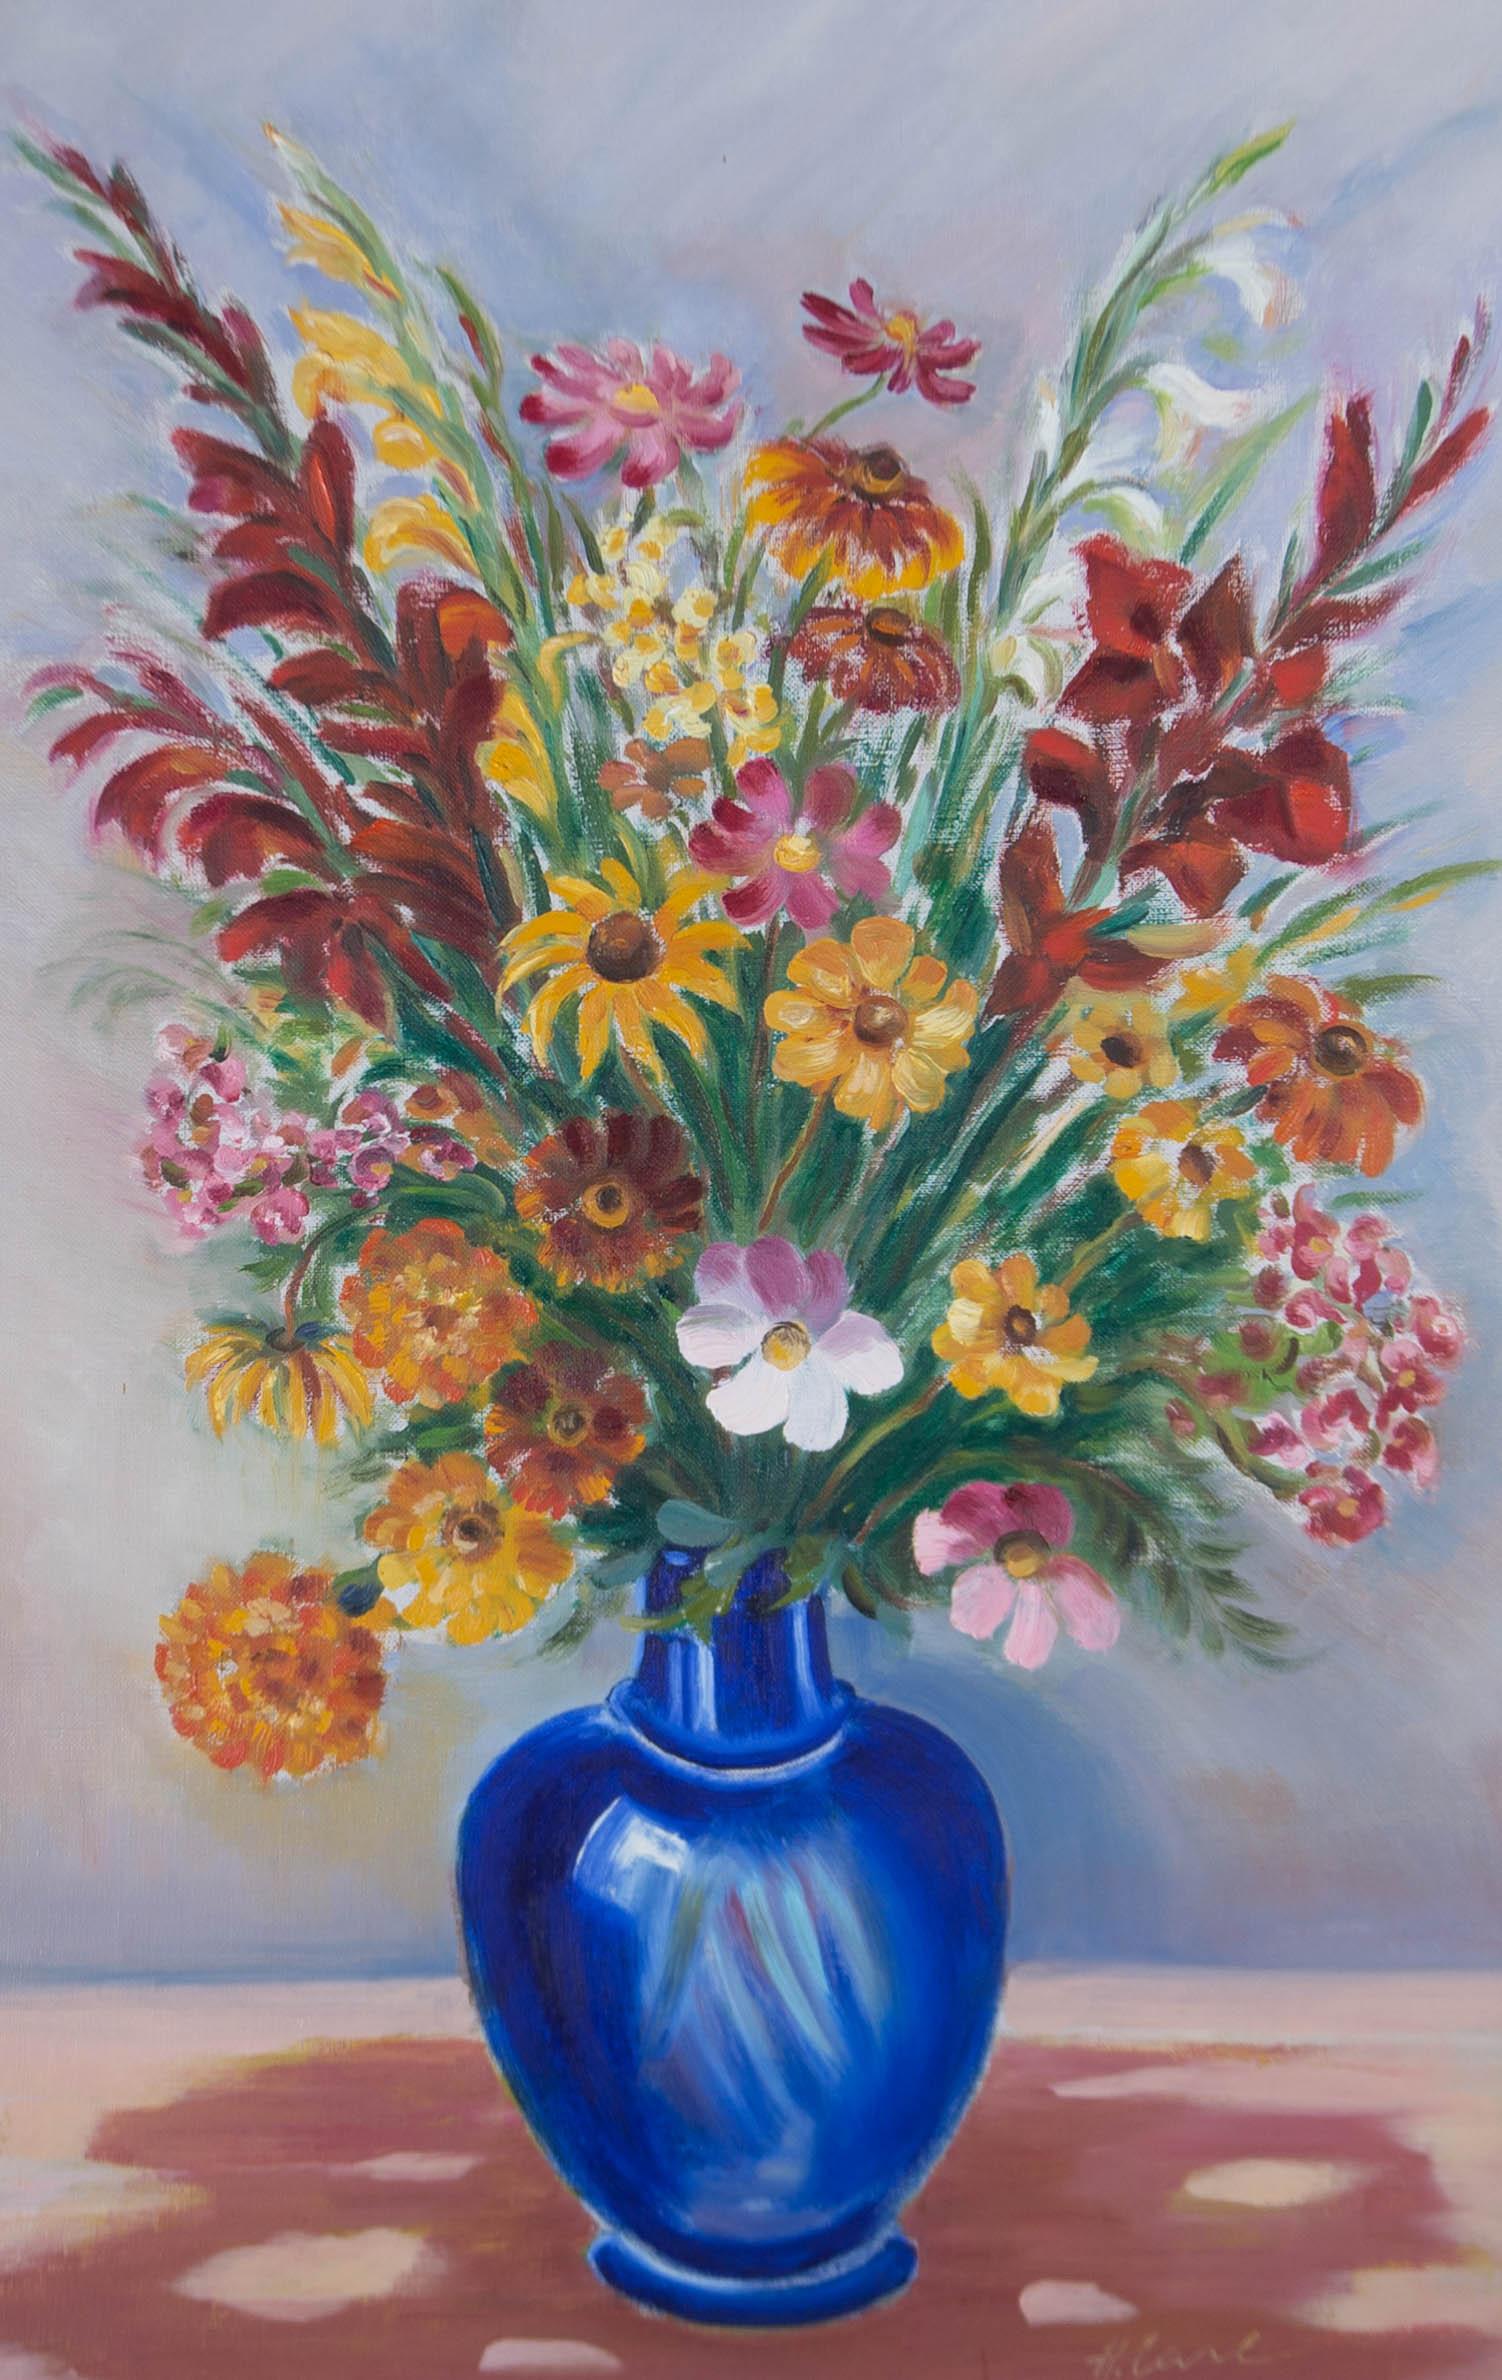 An eye-catching oil depicting numerous red, orange, and pink flowers filling a blue vase on a pink surface against a blue background. Presented in a distressed silver gilt-effect frame. Signed to the lower-right edge. On canvas on stretchers.
